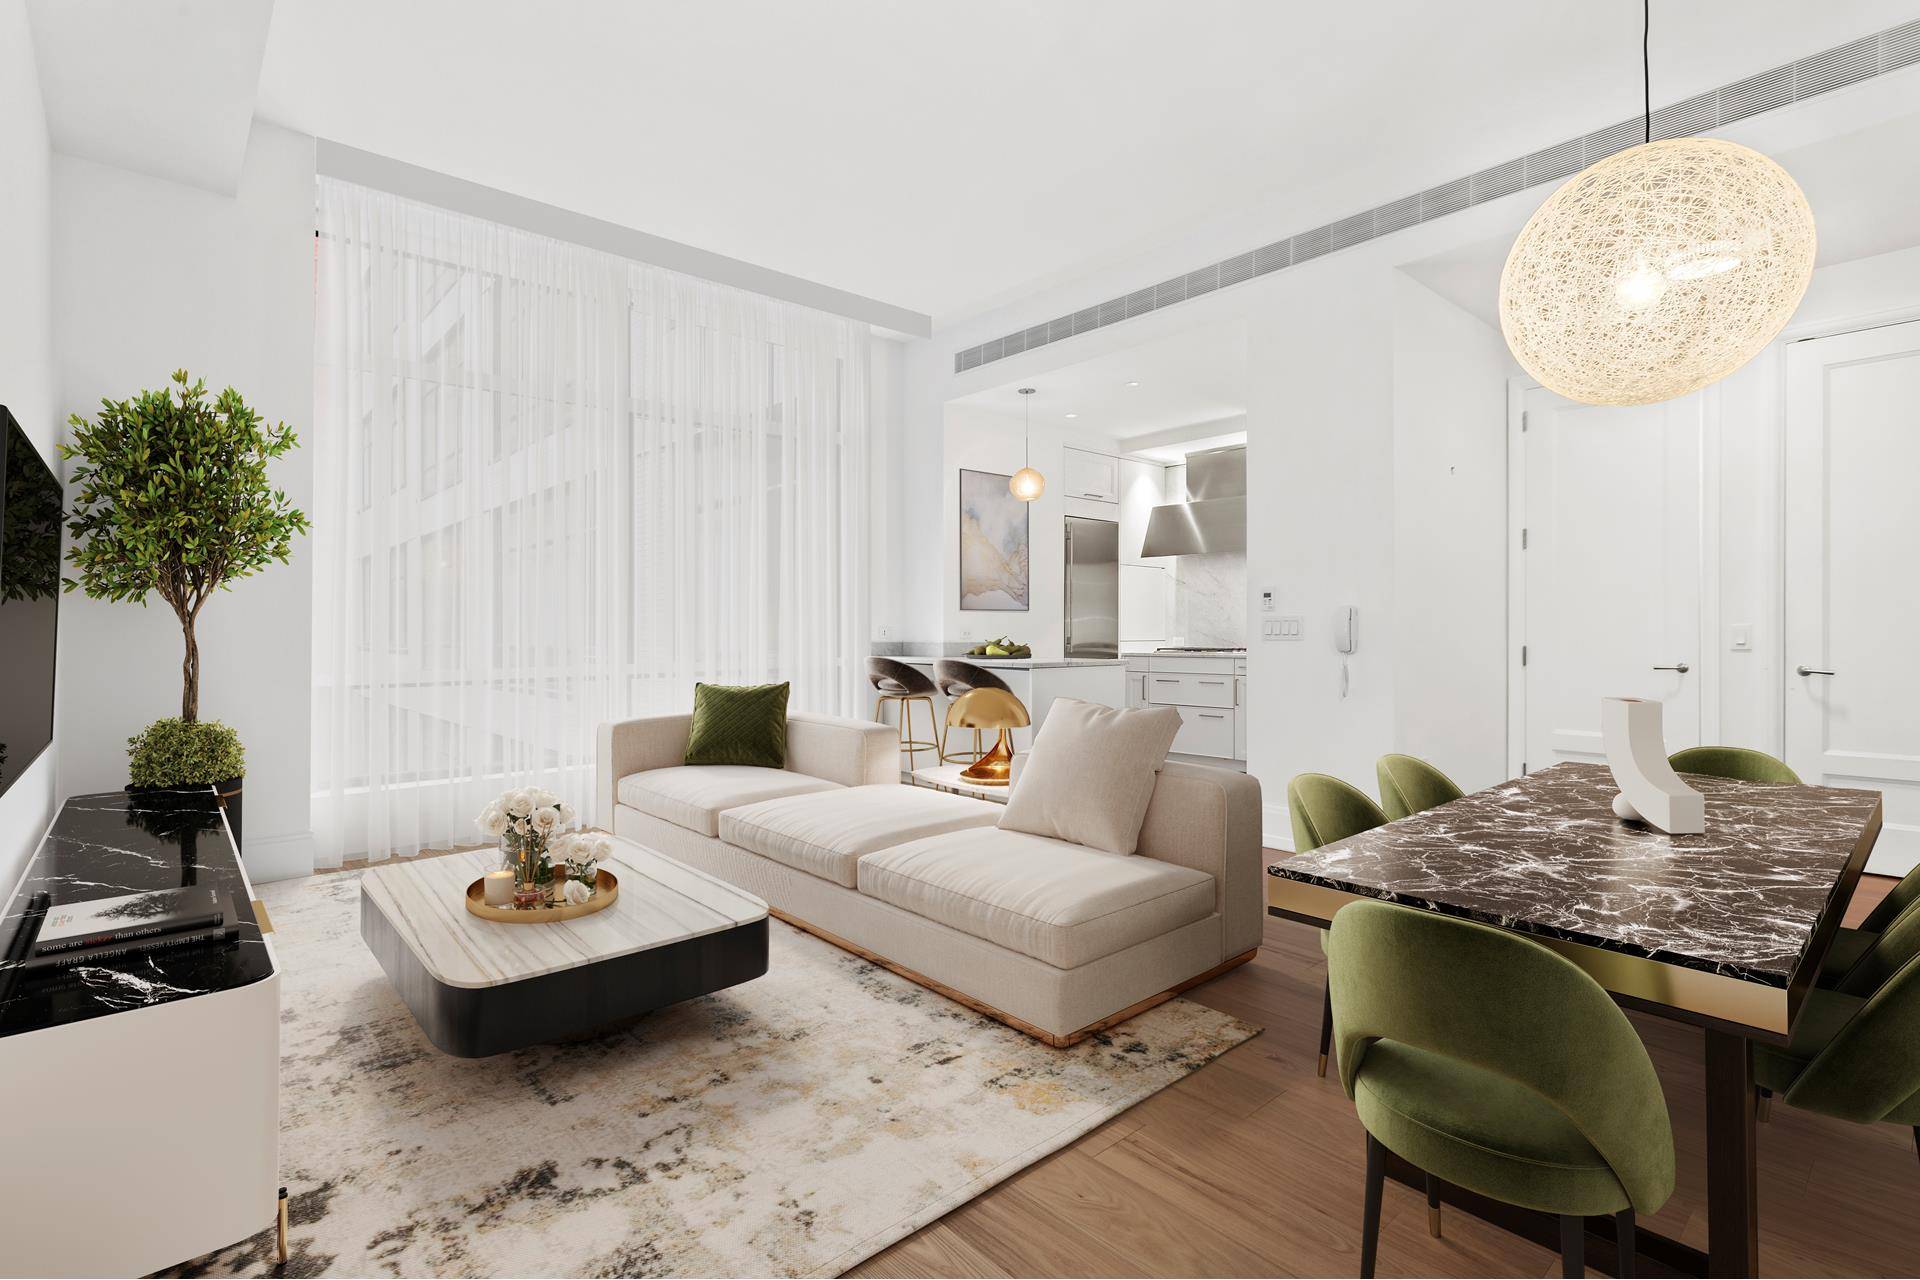 Highly sought after 10 Madison Square West, which is perfectly situated on Madison Square Park, is surrounded by many of the best restaurants and shops in New York City.